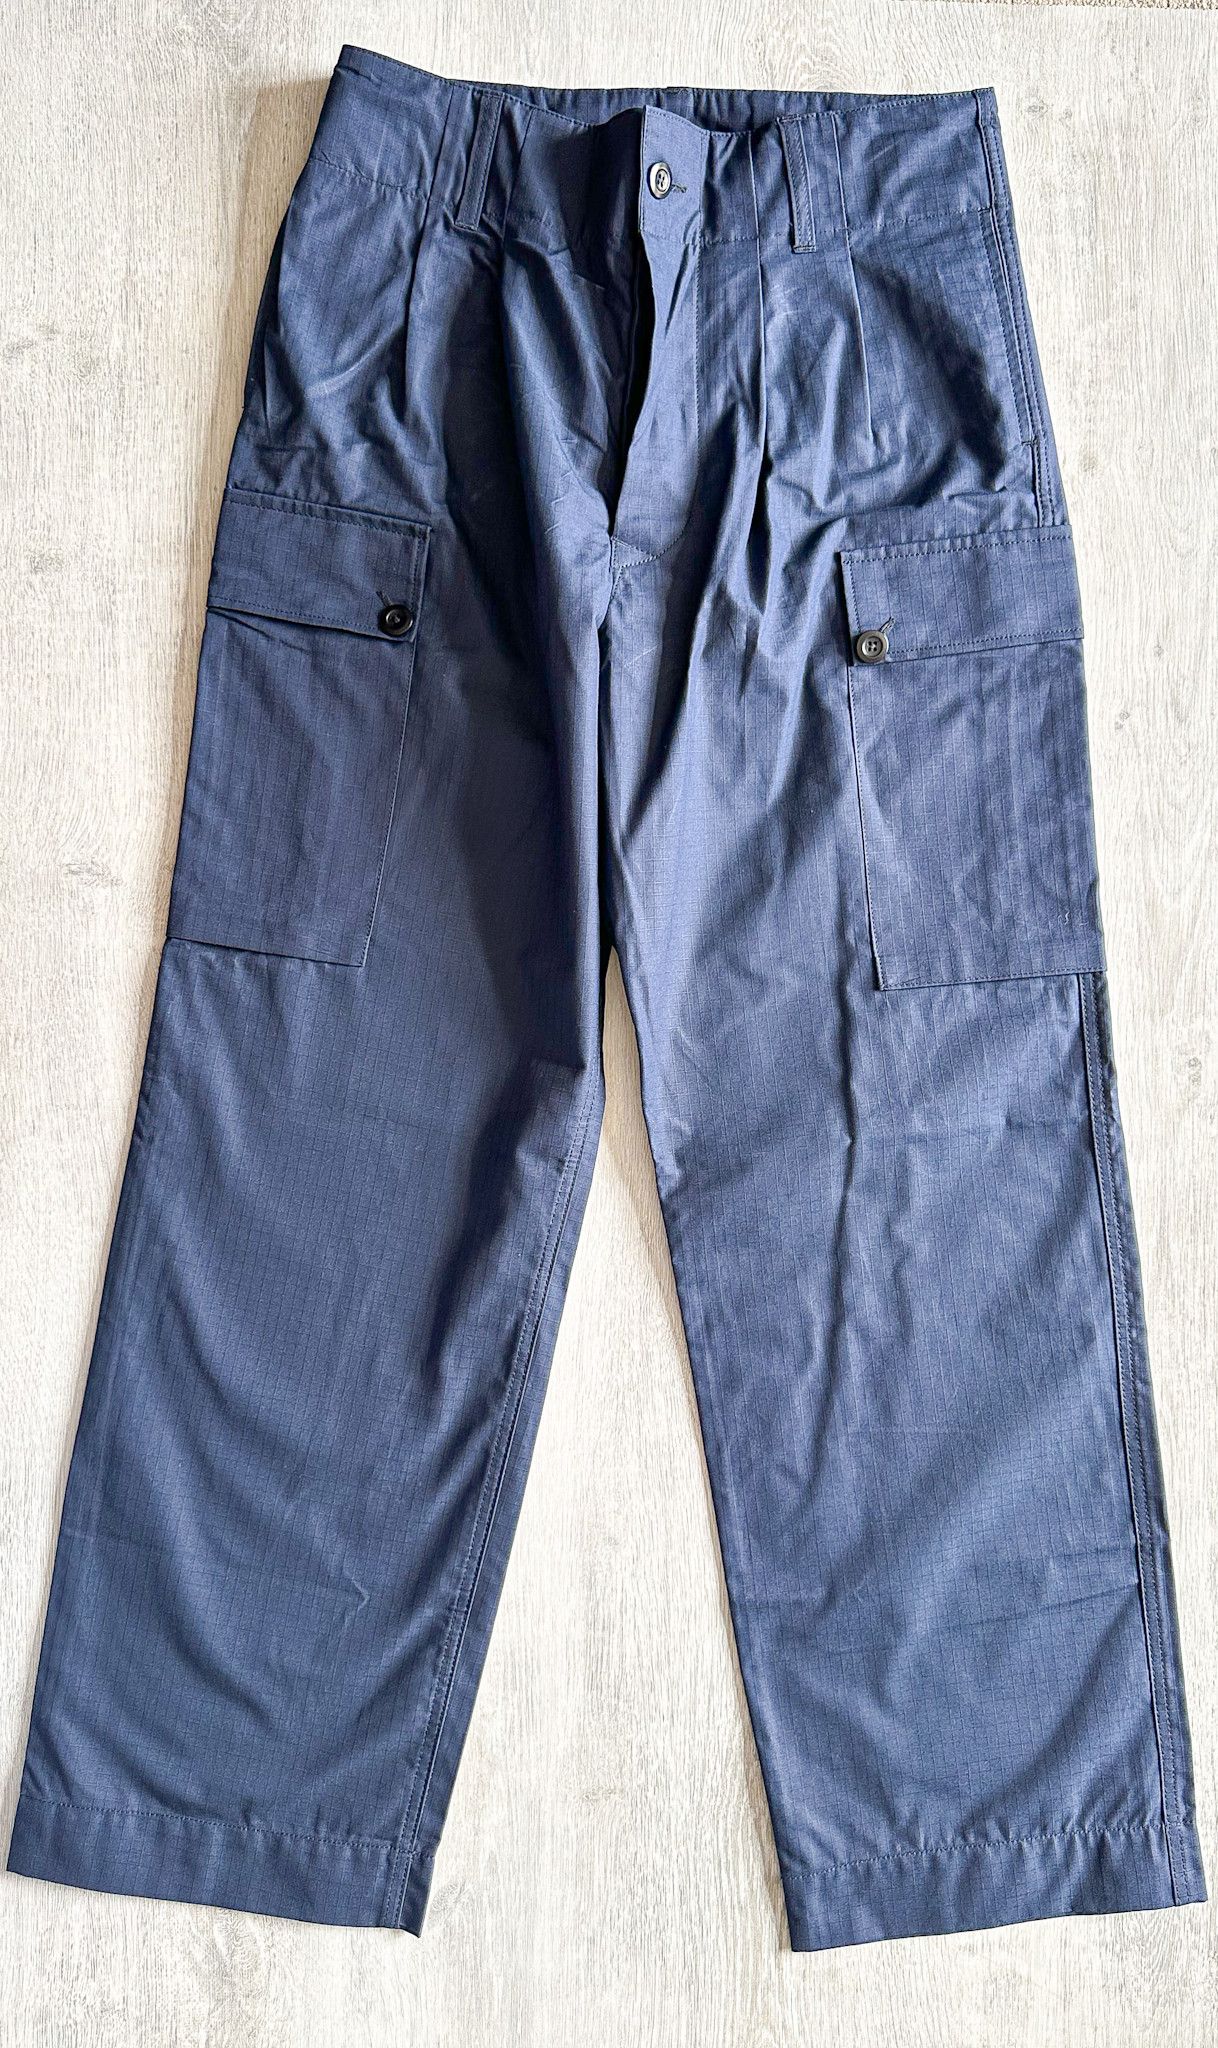 Nigel Cabourn Nigel Cabourn Ripstop Cotton Dutch Pants Trousers in Navy ...